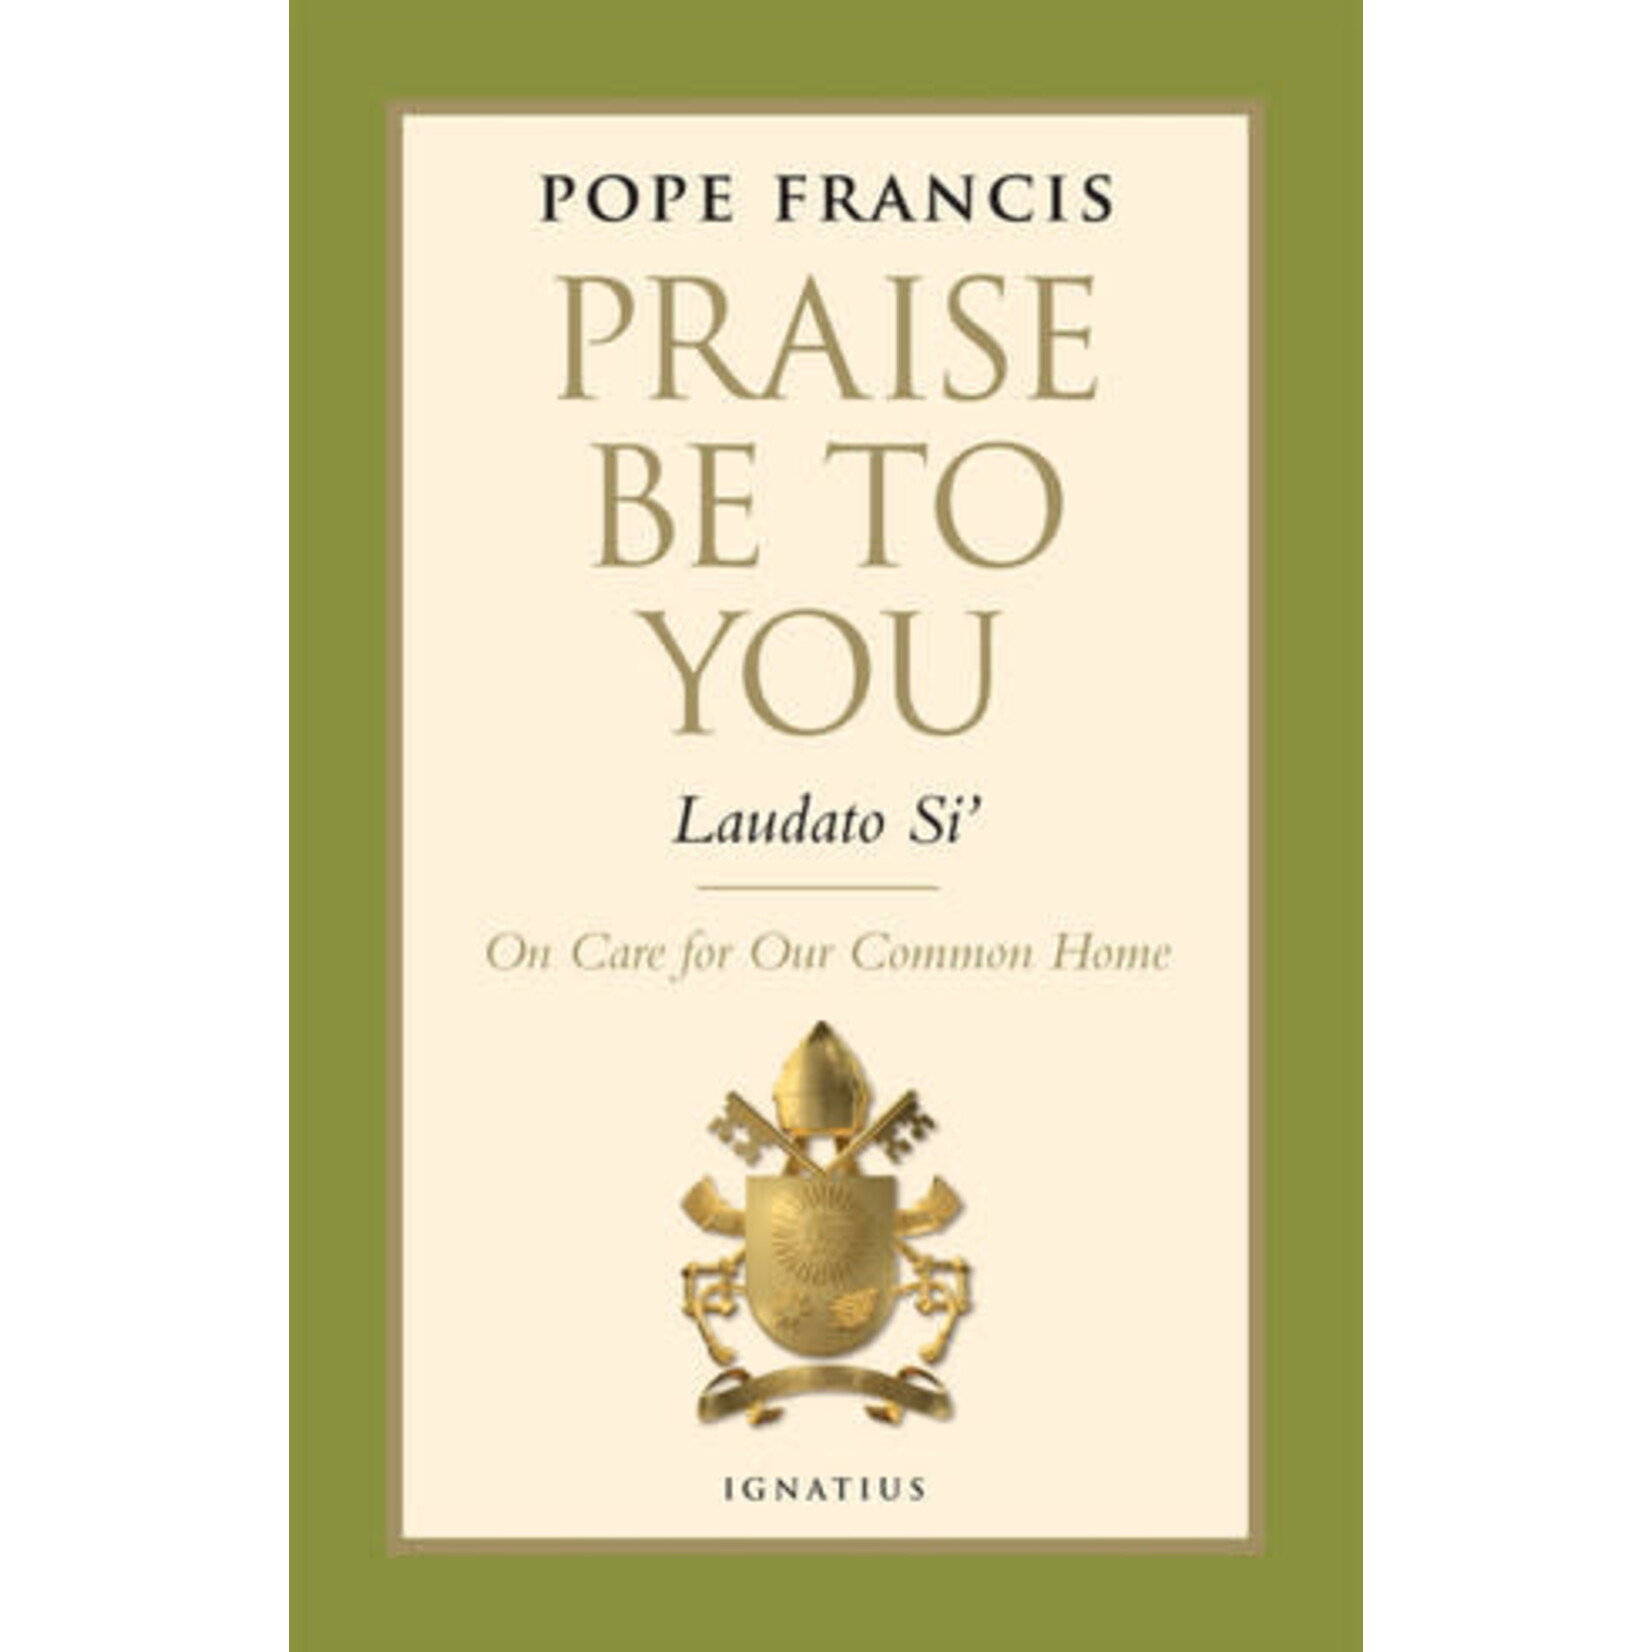 Praise be to You (Laudato Si')